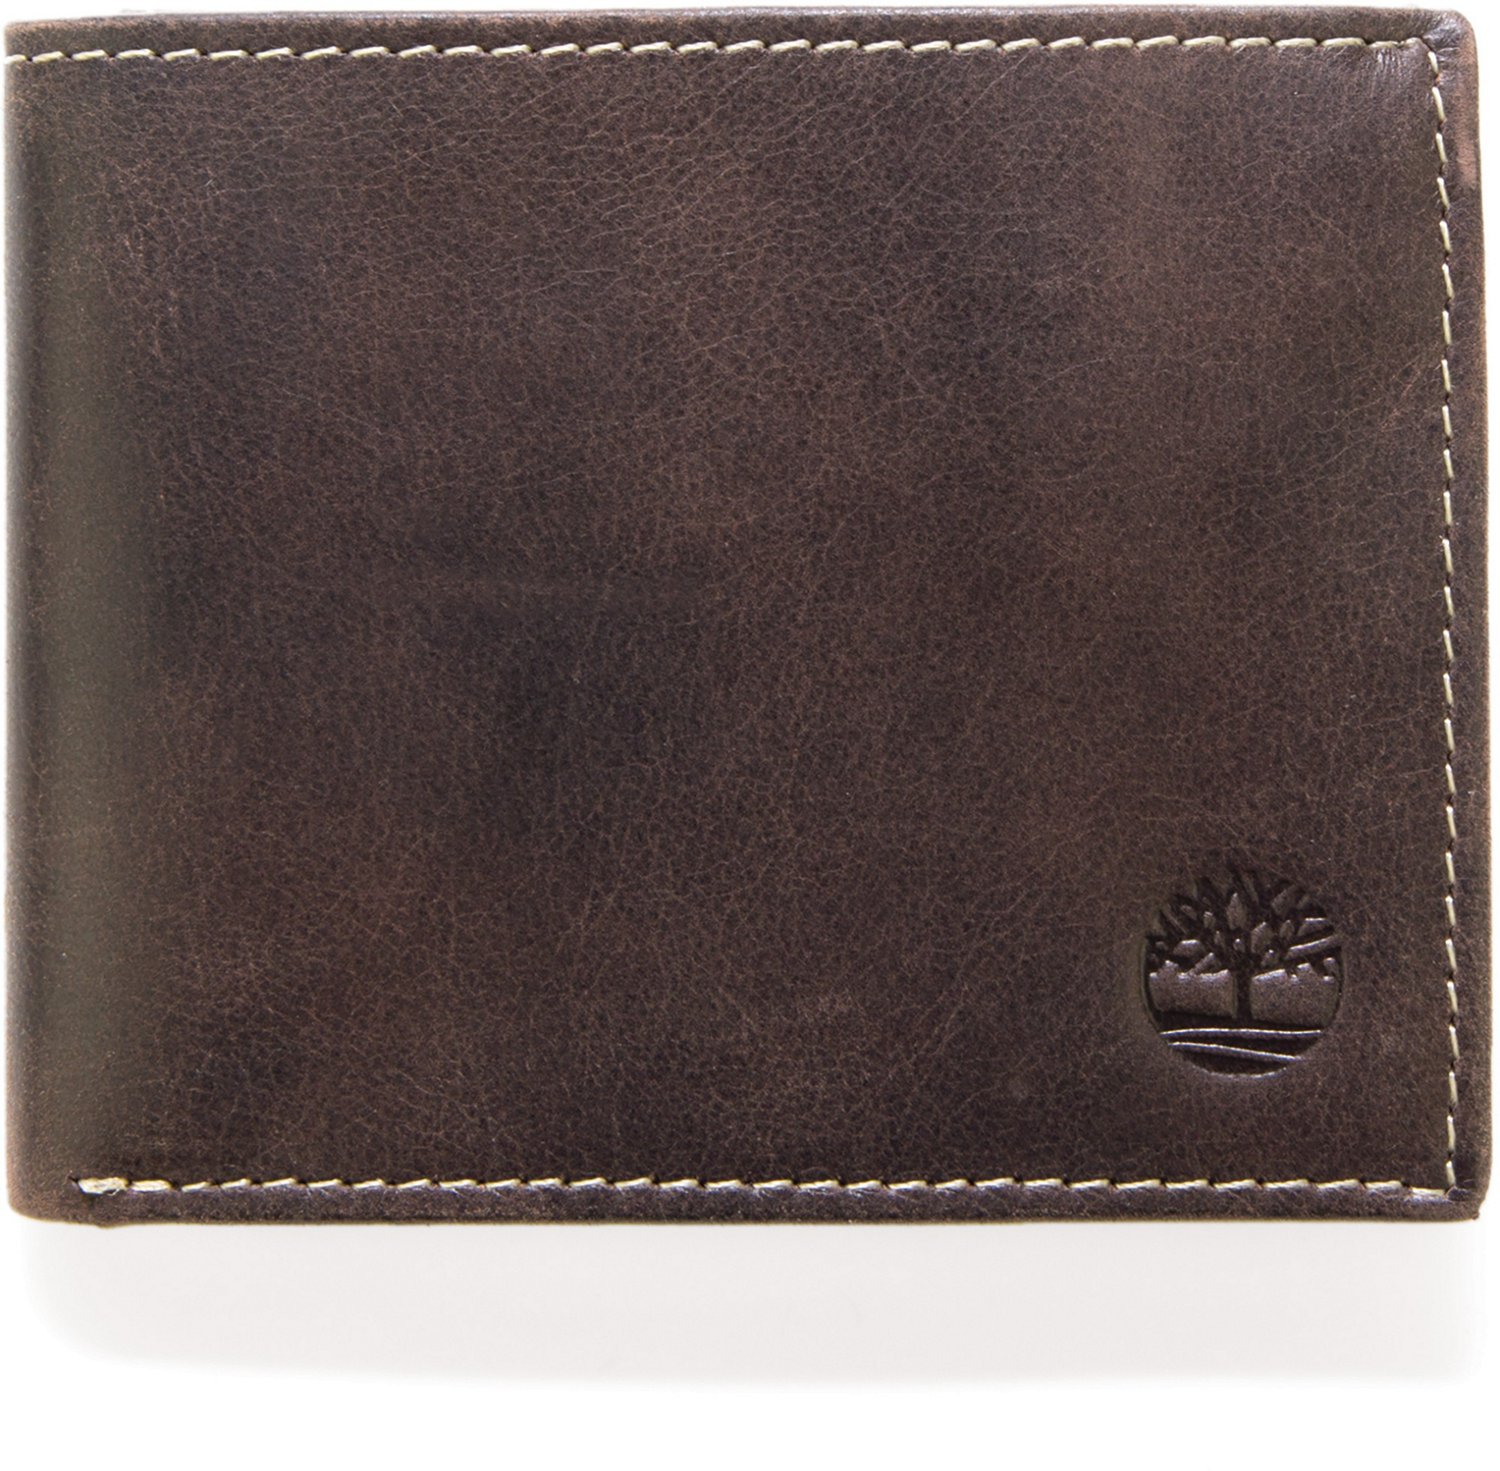 Timberland Cloudy Passcase Wallet | Free Shipping at Academy